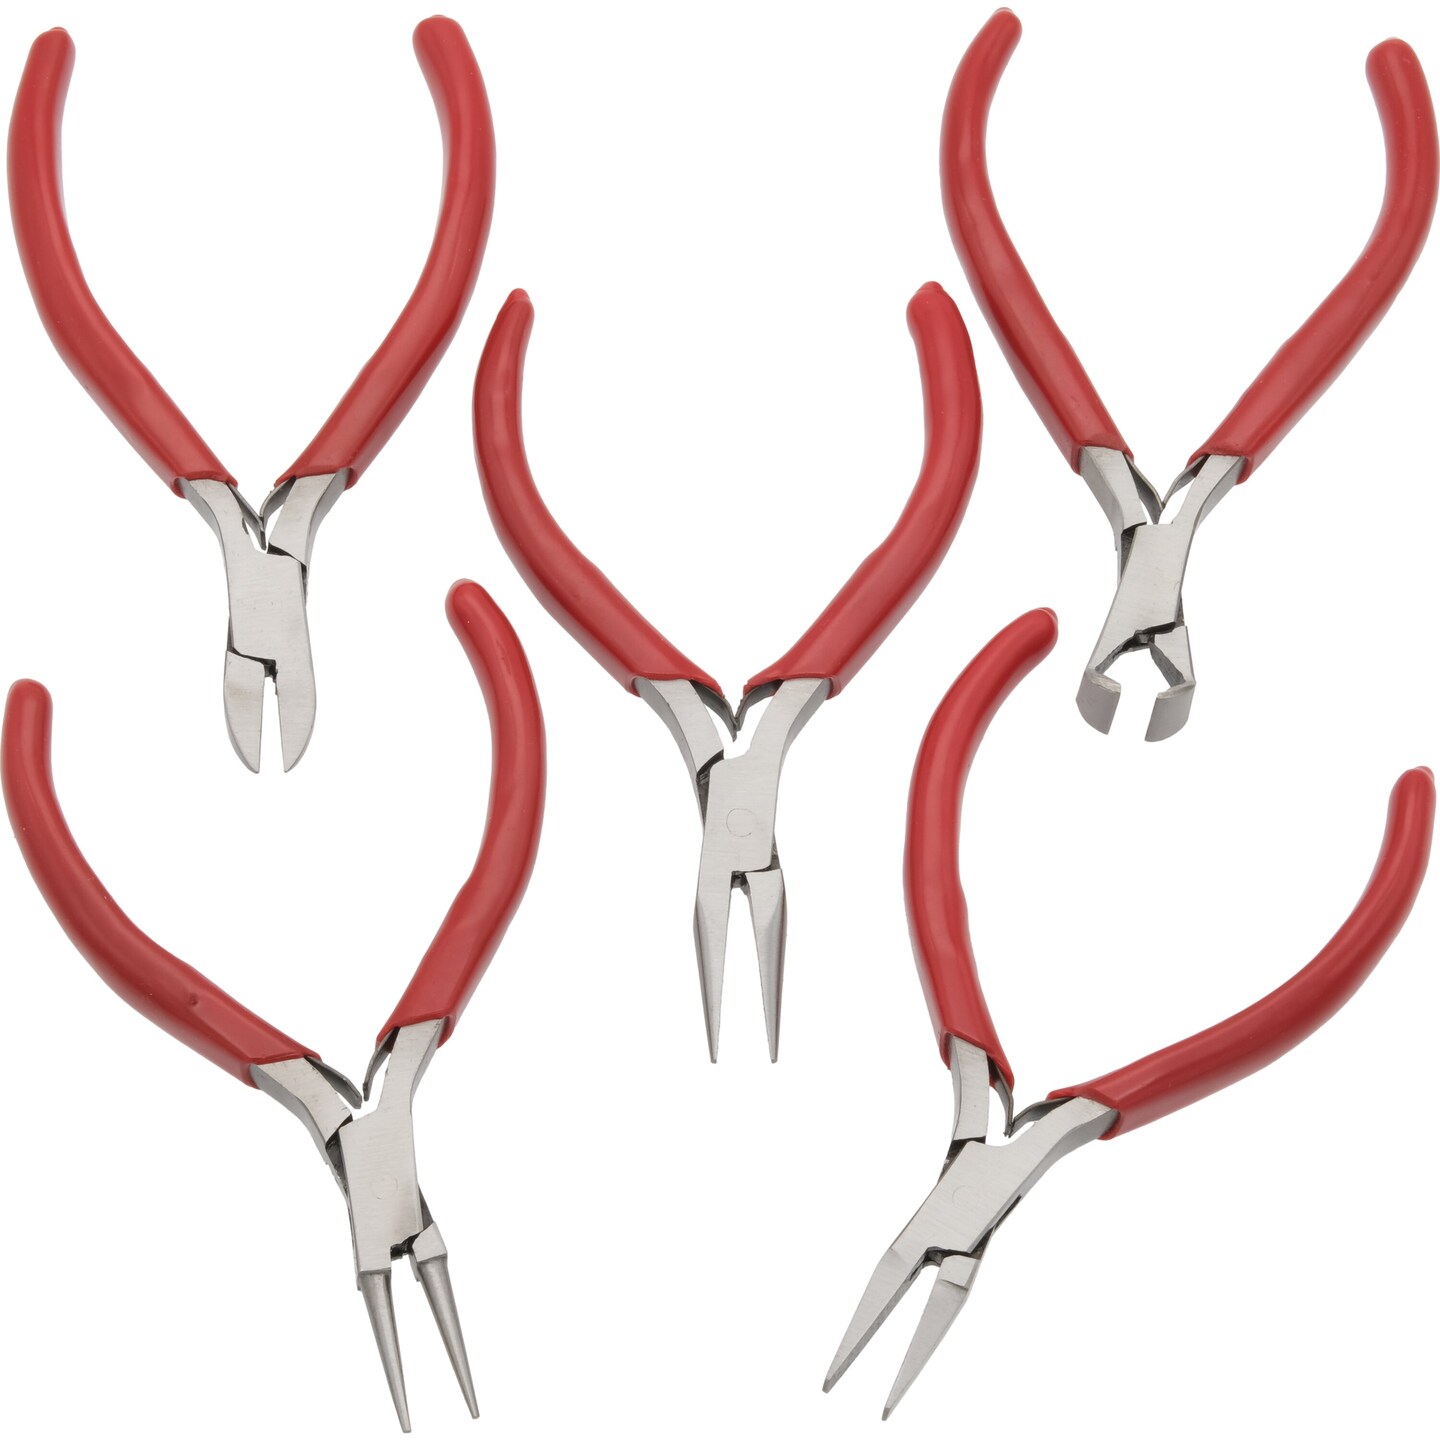 5 Chain Round Nose Pliers Cutters Jewelers Beading Tool